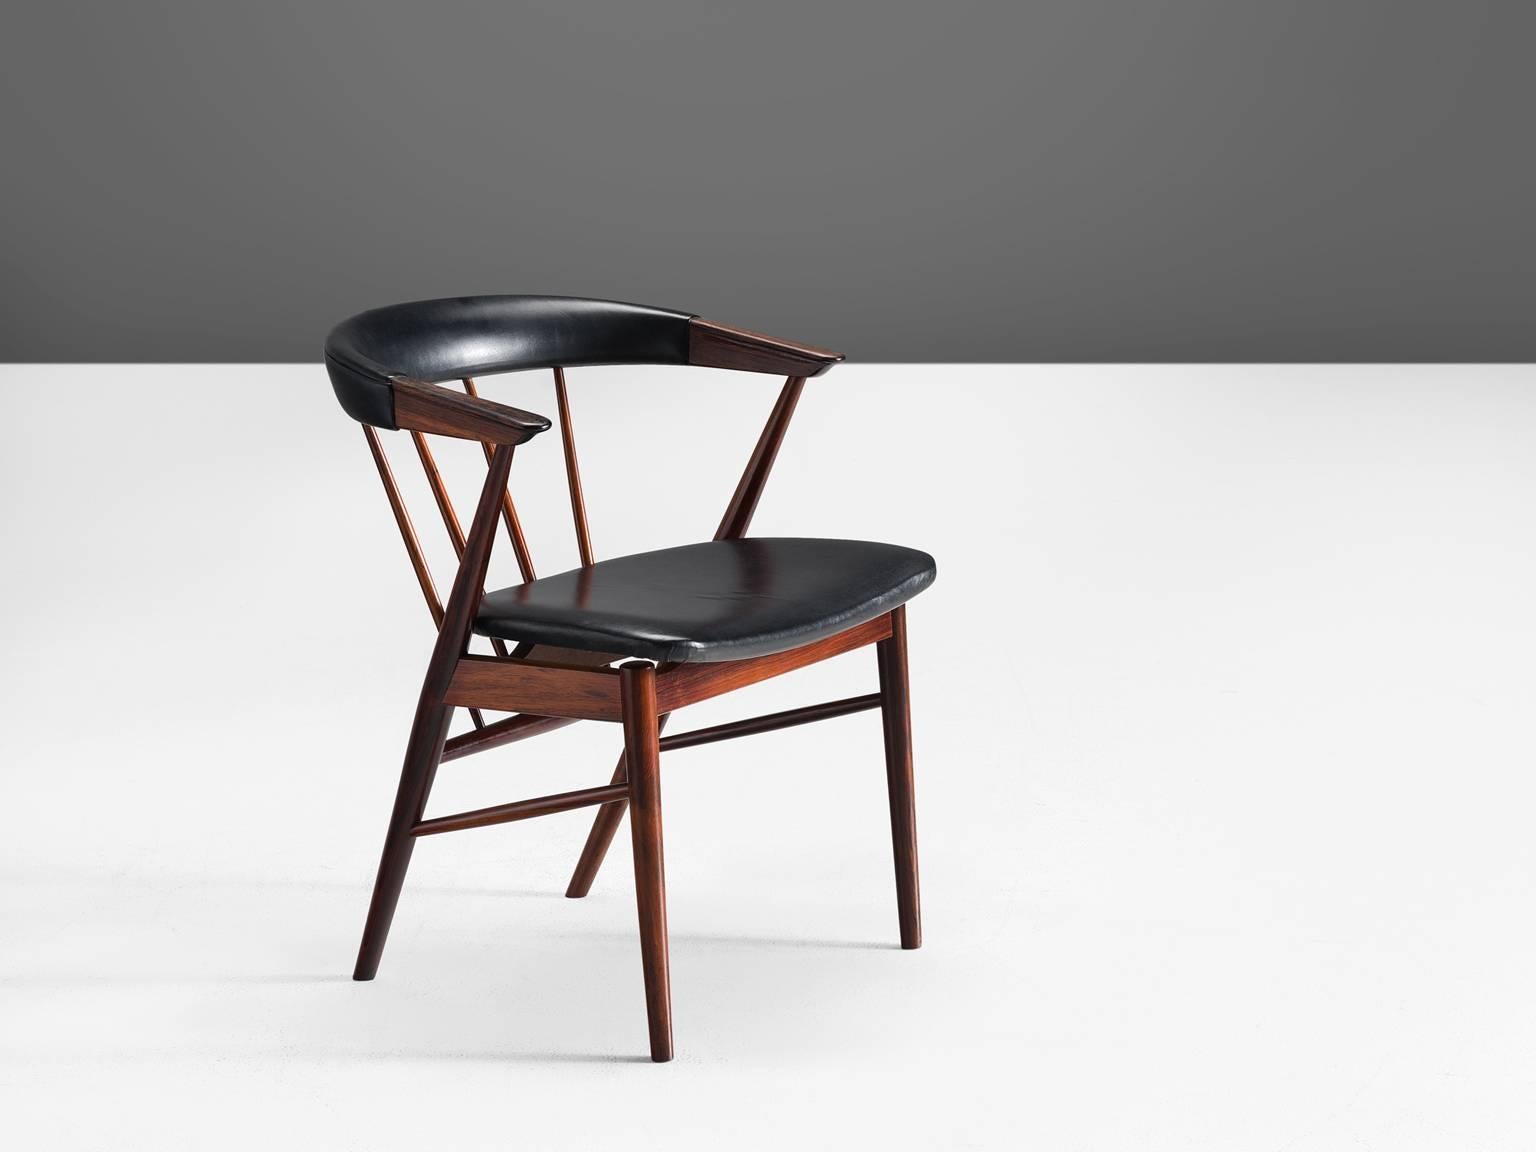 Helge Sibast, chair, rosewood and leather, Denmark, 1950s.

This chair by Helge Sibast for Sibast Furniture exhibits a distinct cantilevered seat with a bent backrest. The back is supported with a series of tapered spindles. The back legs taper into